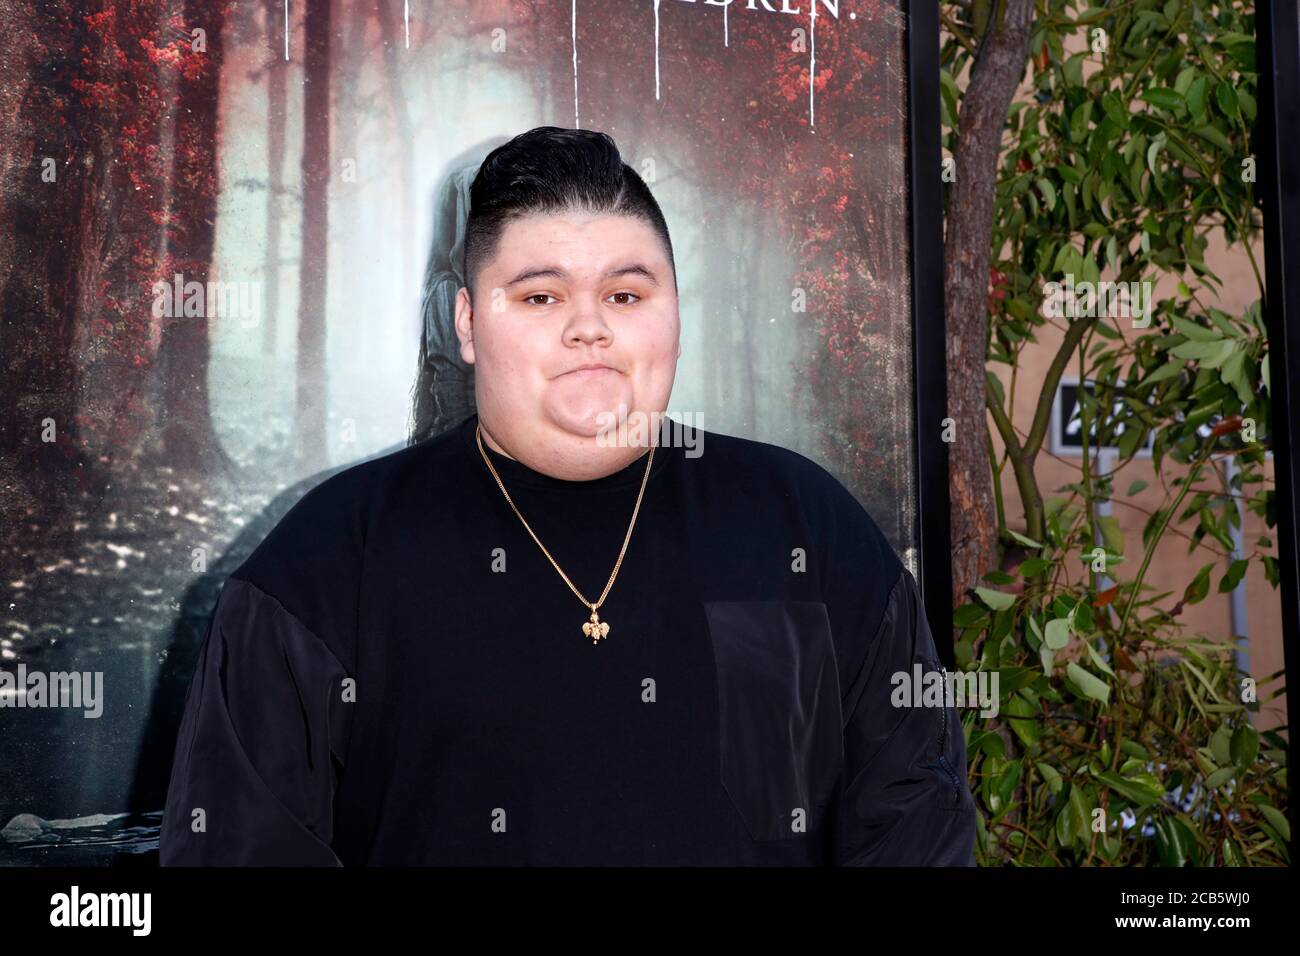 LOS ANGELES - APR 15:  Jovan Armand at the 'The Curse Of La Llorona' Premiere at the Egyptian Theater on April 15, 2019 in Los Angeles, CA Stock Photo